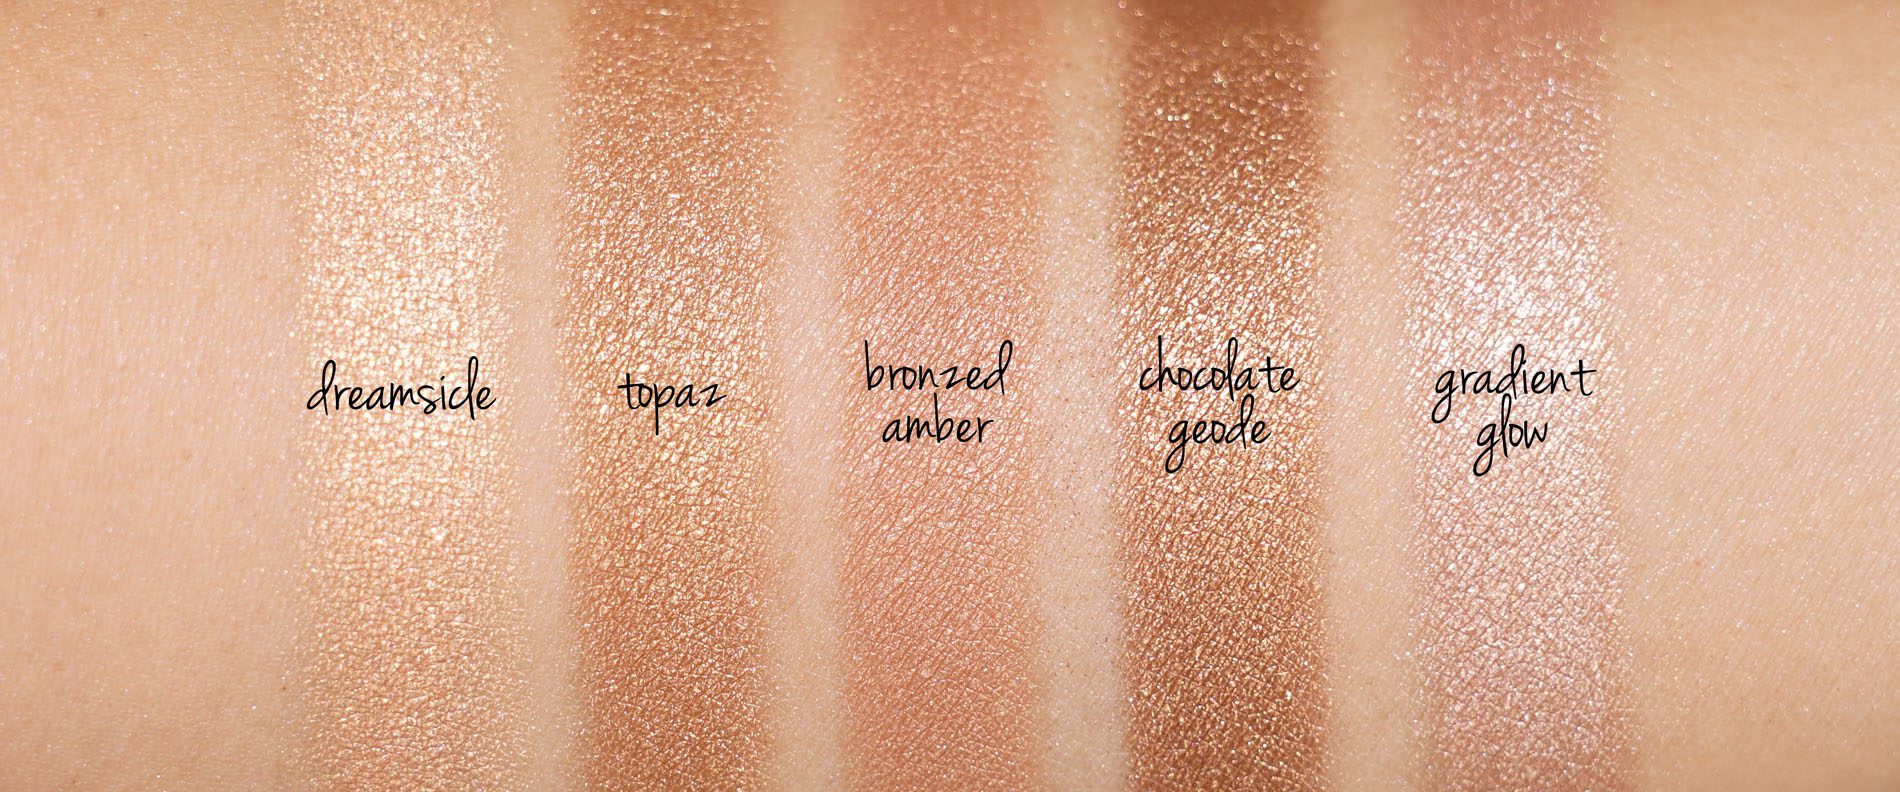 Becca Shimmering Skin Perfector Pressed Highlighter Swatches + - The Beauty Look Book